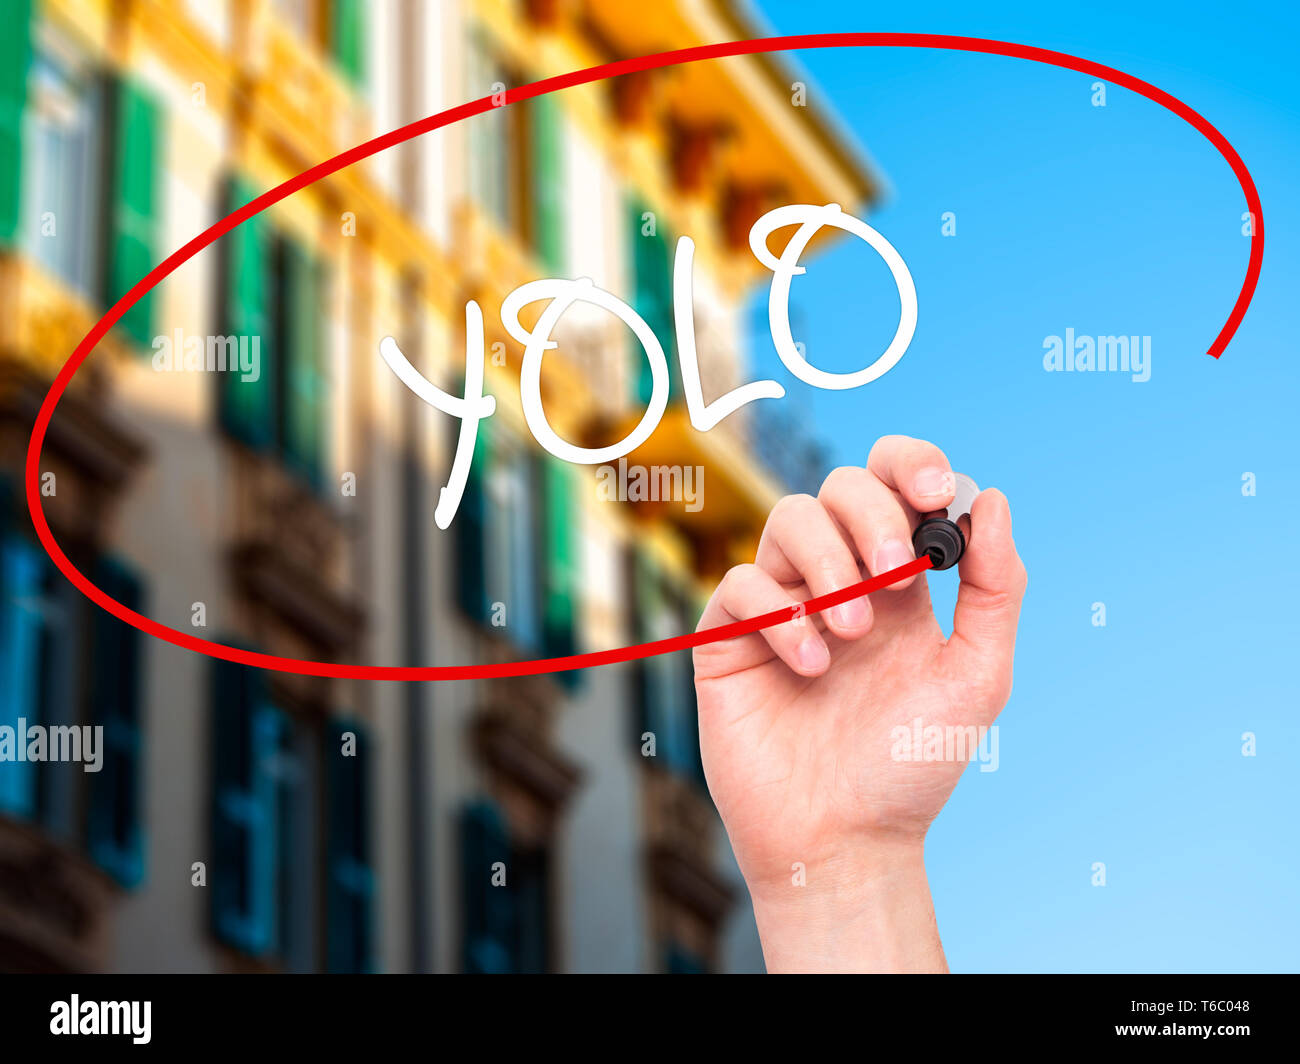 Only live once hi-res stock photography and images - Alamy